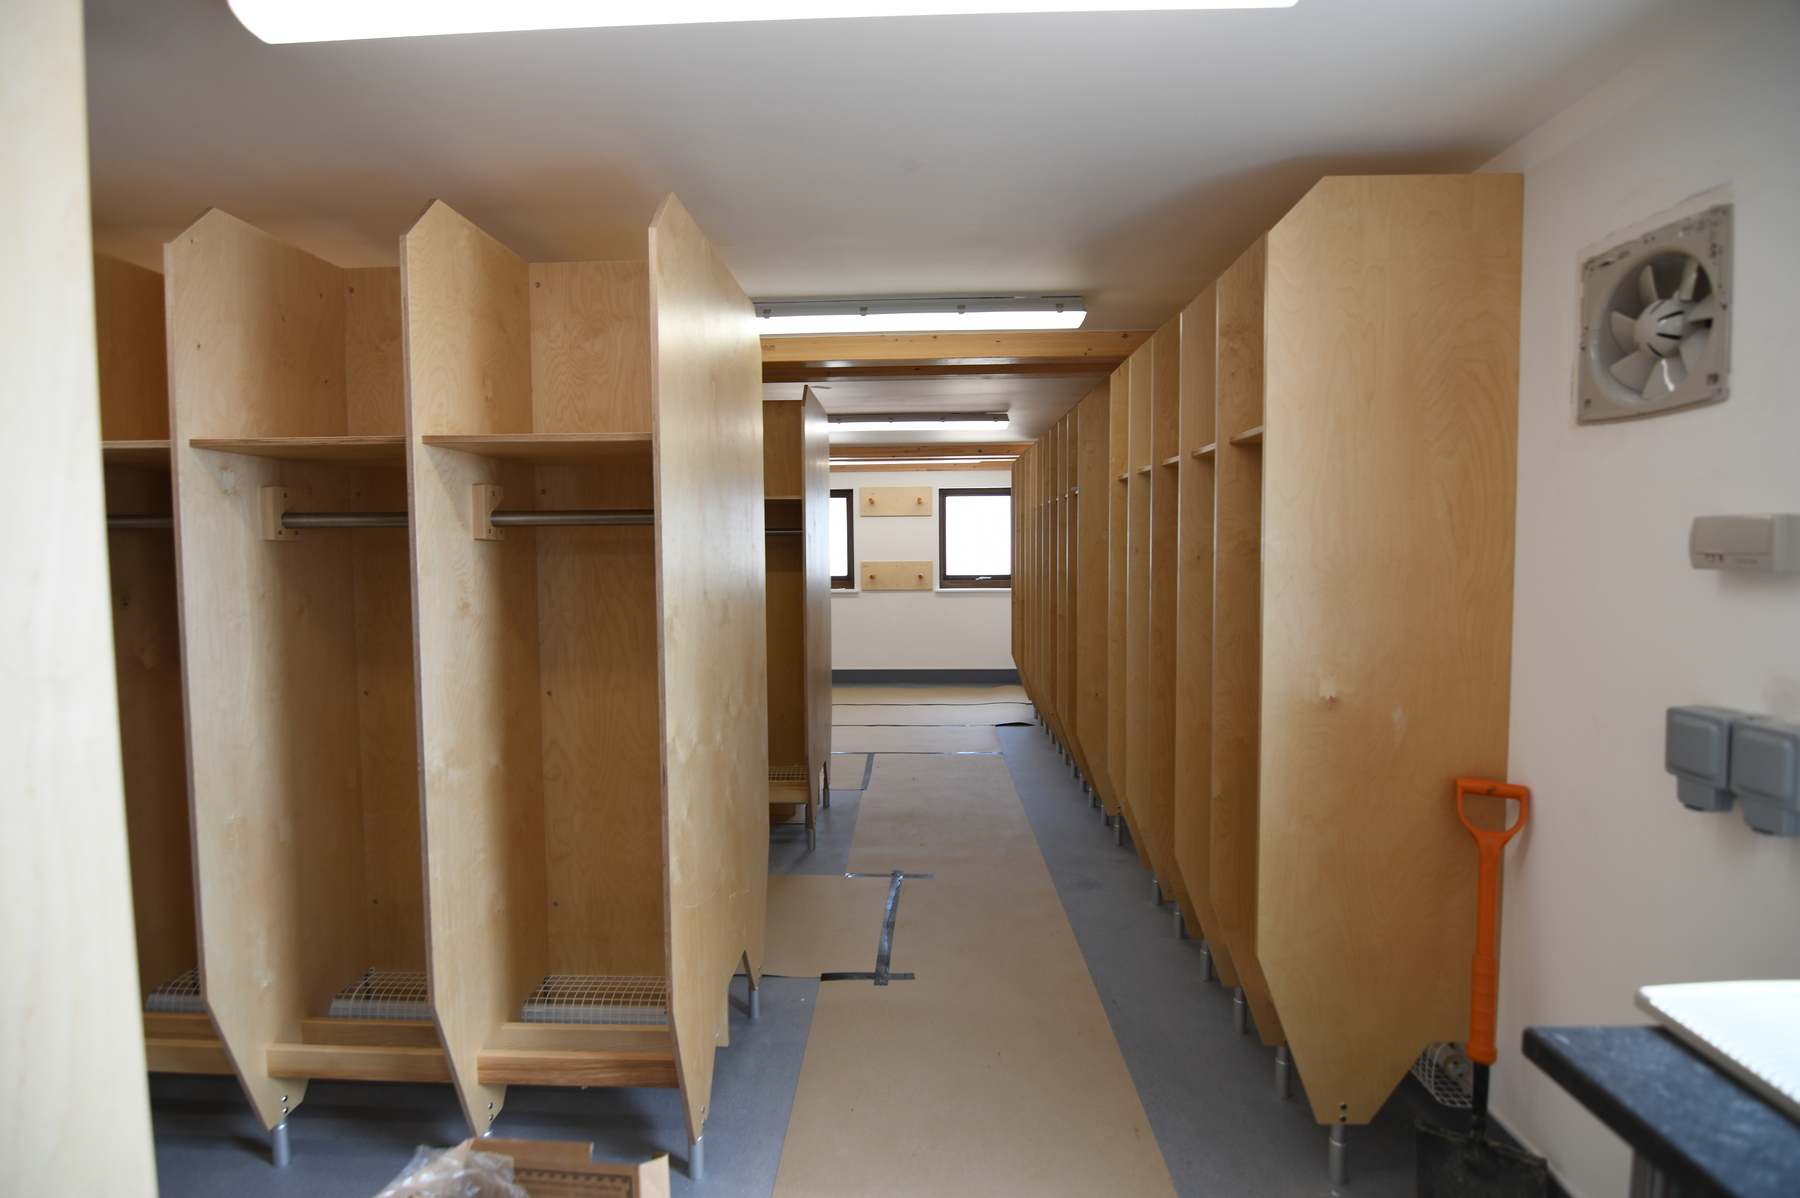 Lockers being installed in changing room